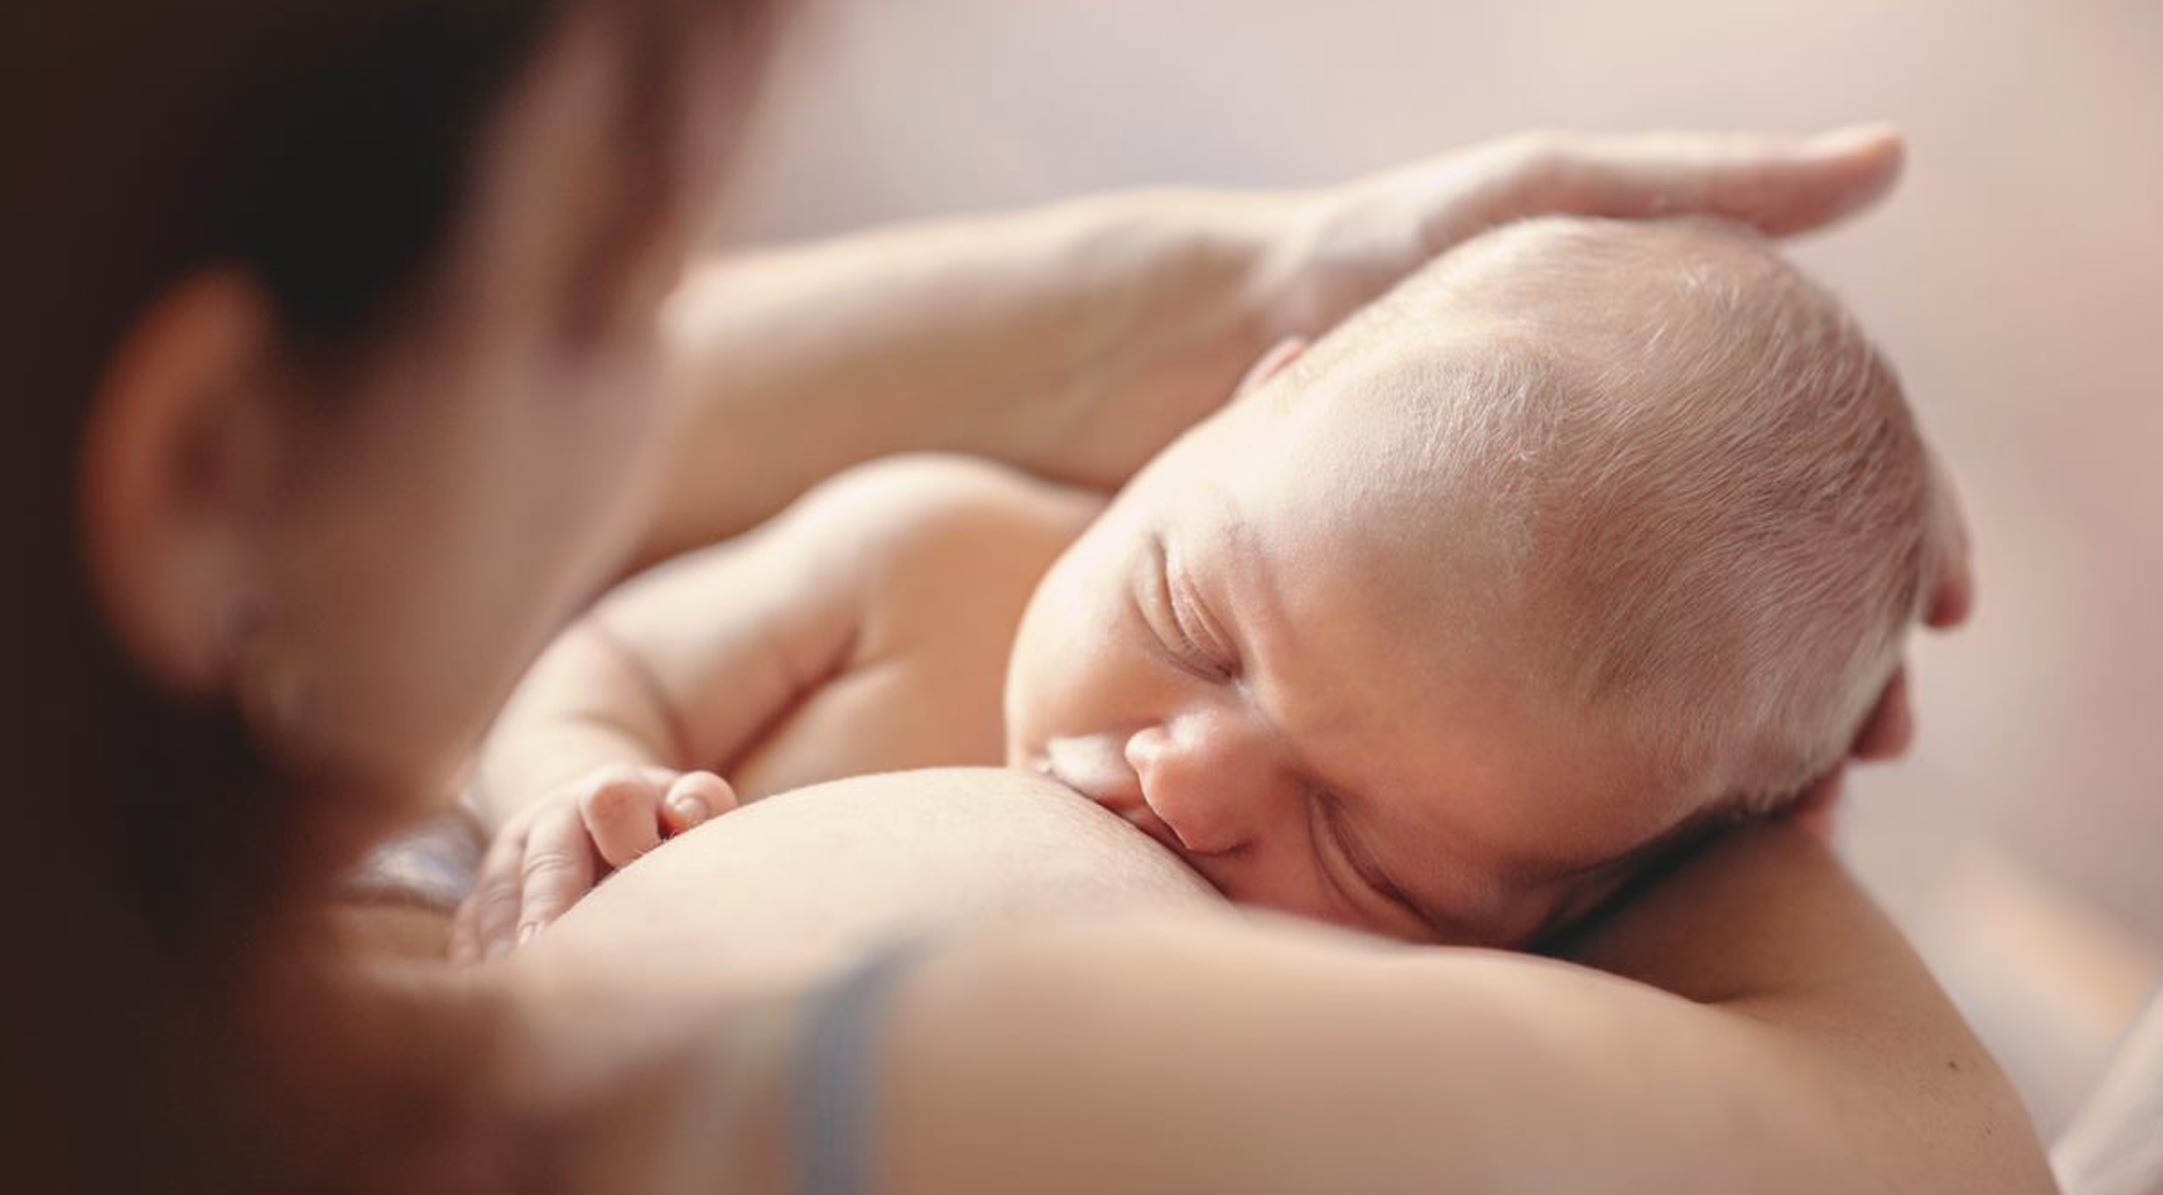 How To Stop Breastfeeding While Keeping Yourself & Baby Happy - Motherly